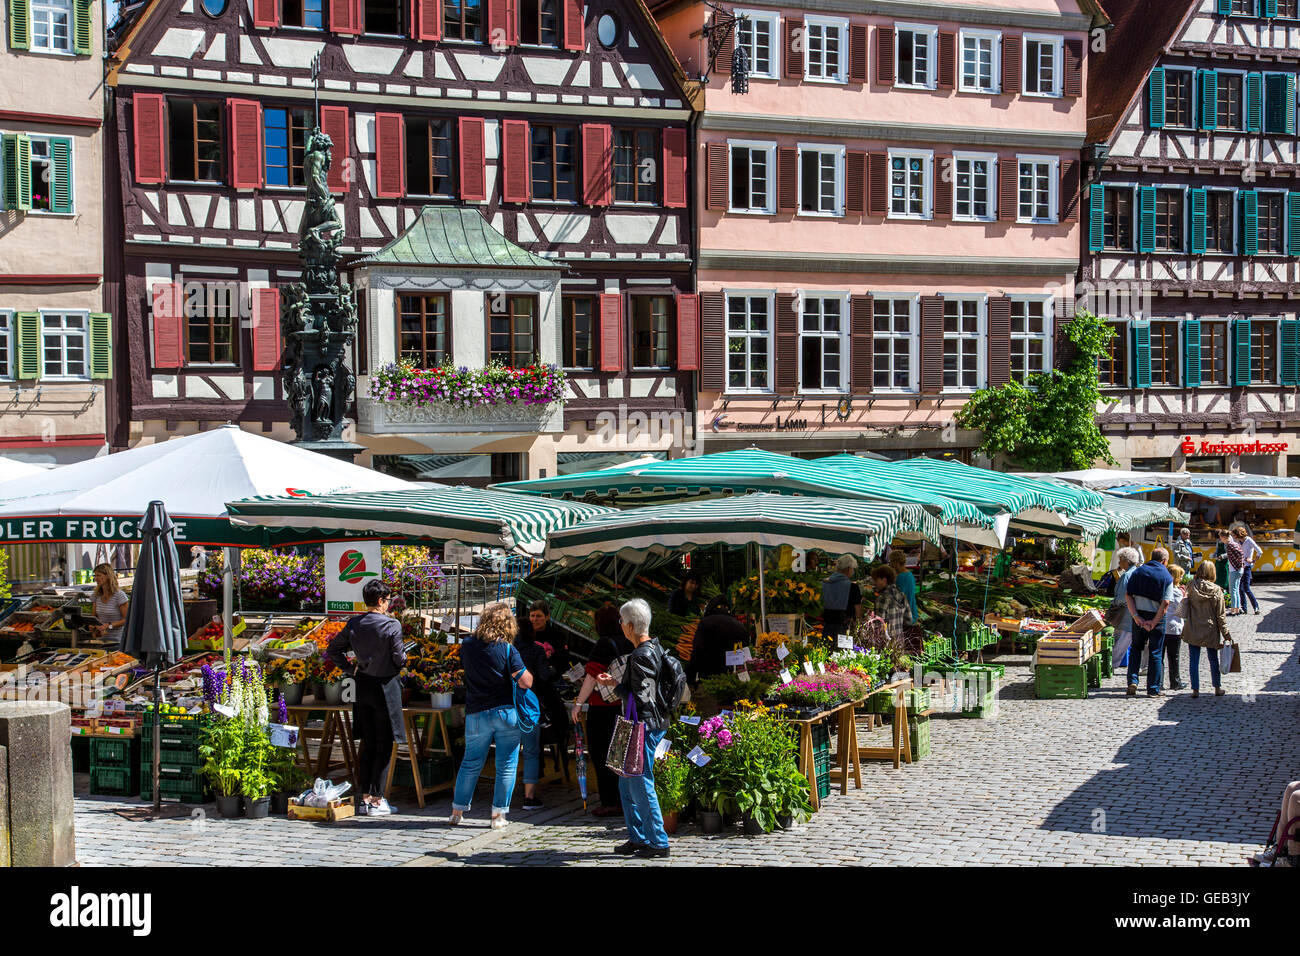 Fresh weekly farmers market on the historic market place, in the old town of Tübingen, Germany Stock Photo